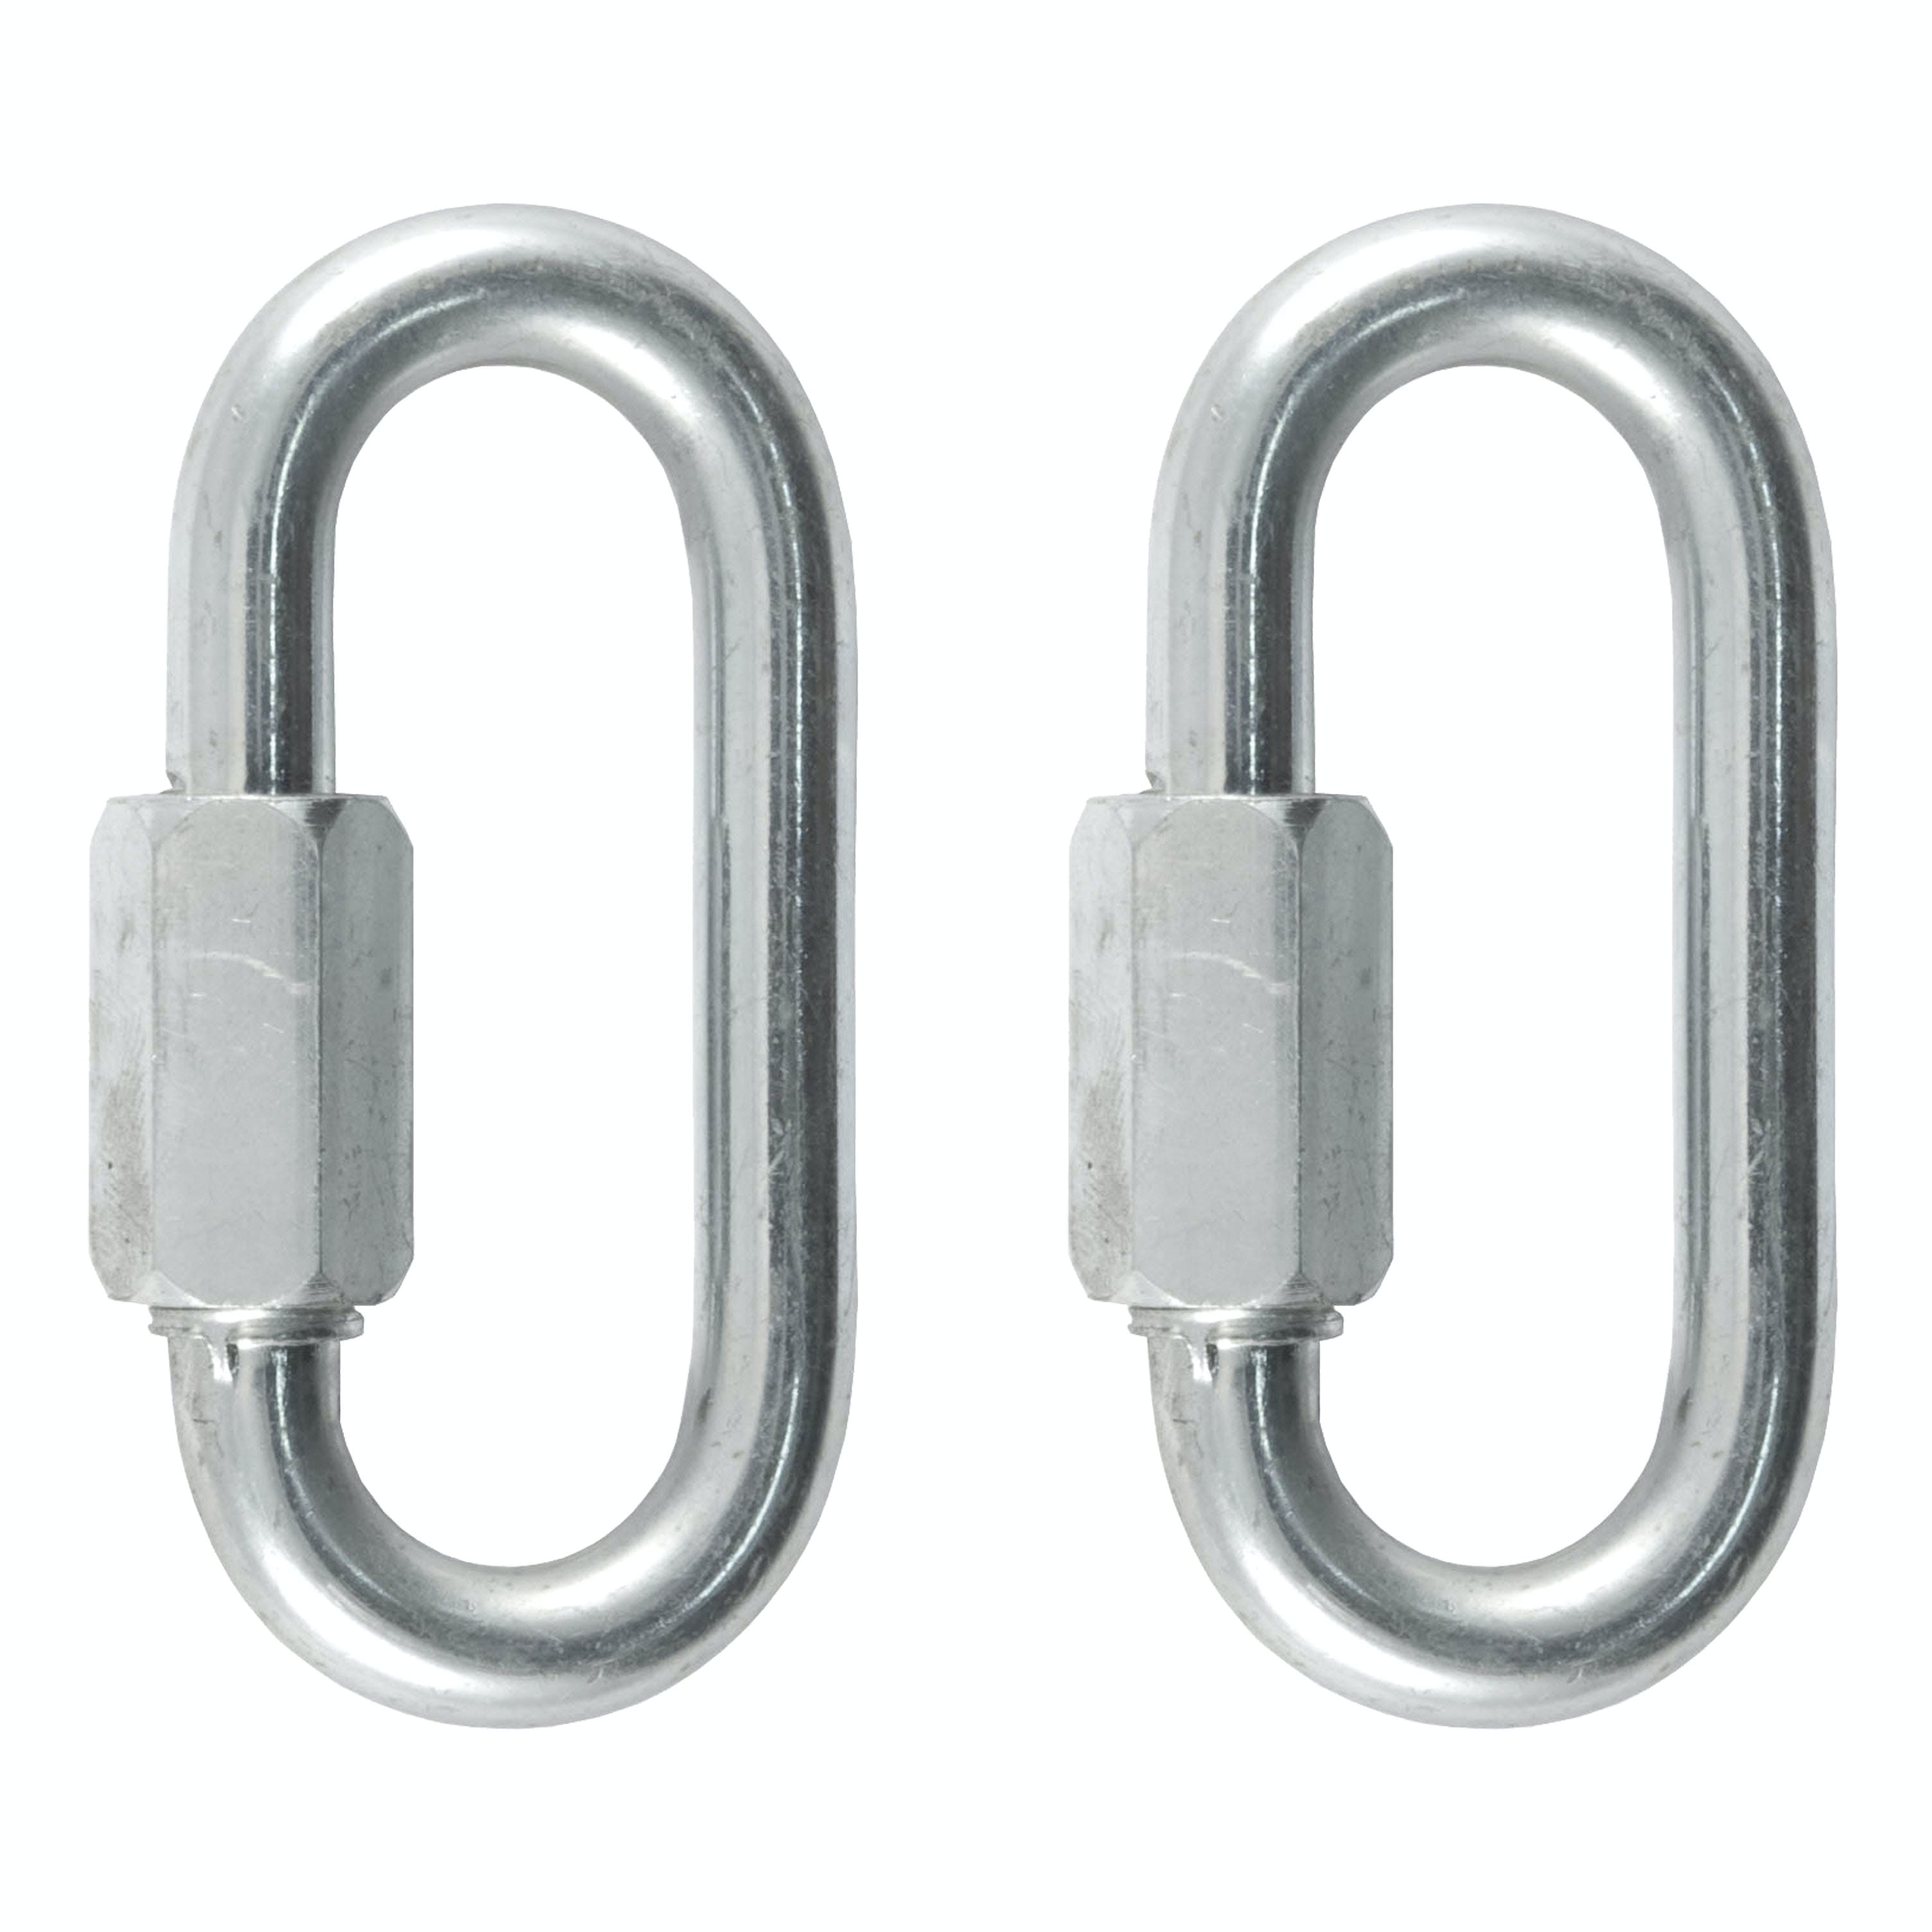 CURT 82903 5/16 Quick Links (8,800 lbs. Breaking Strength, 2-Pack)